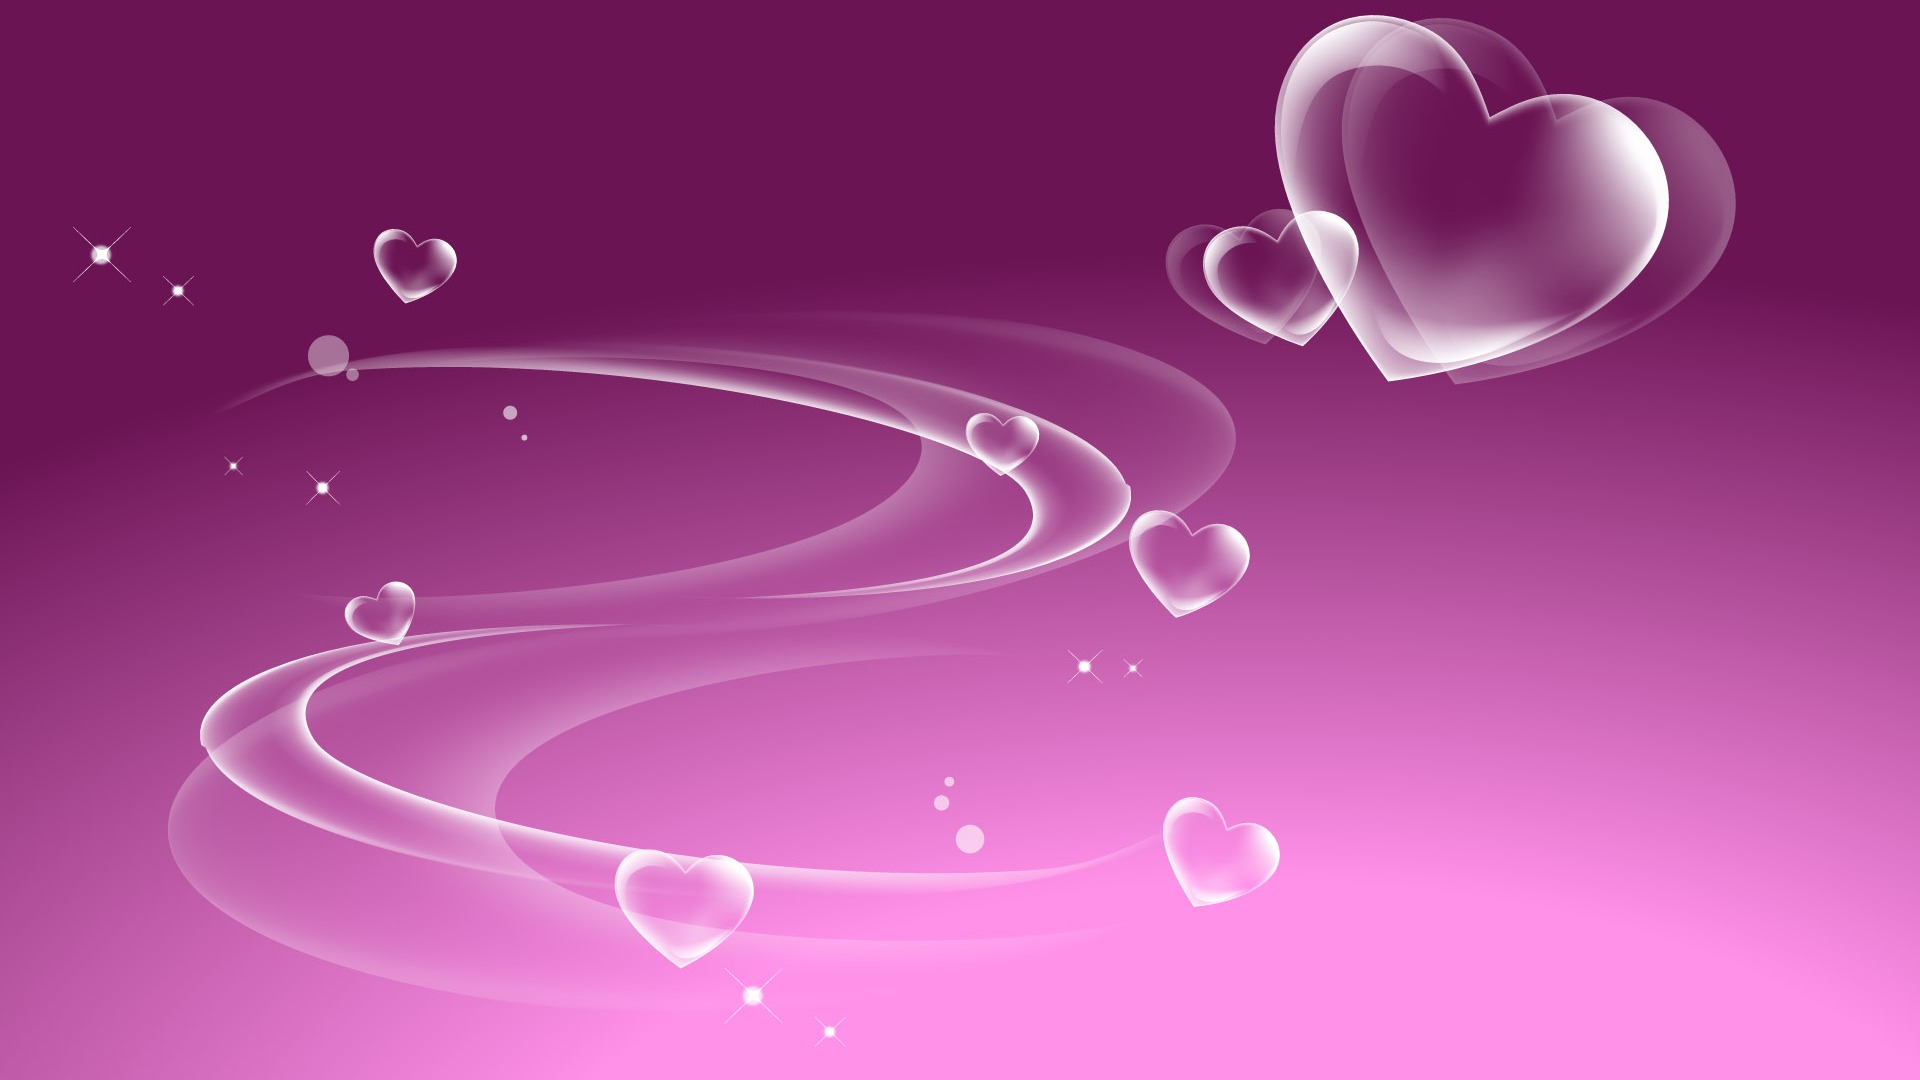 Valentine's Day Love Theme Wallpapers (2) #2 - 1920x1080